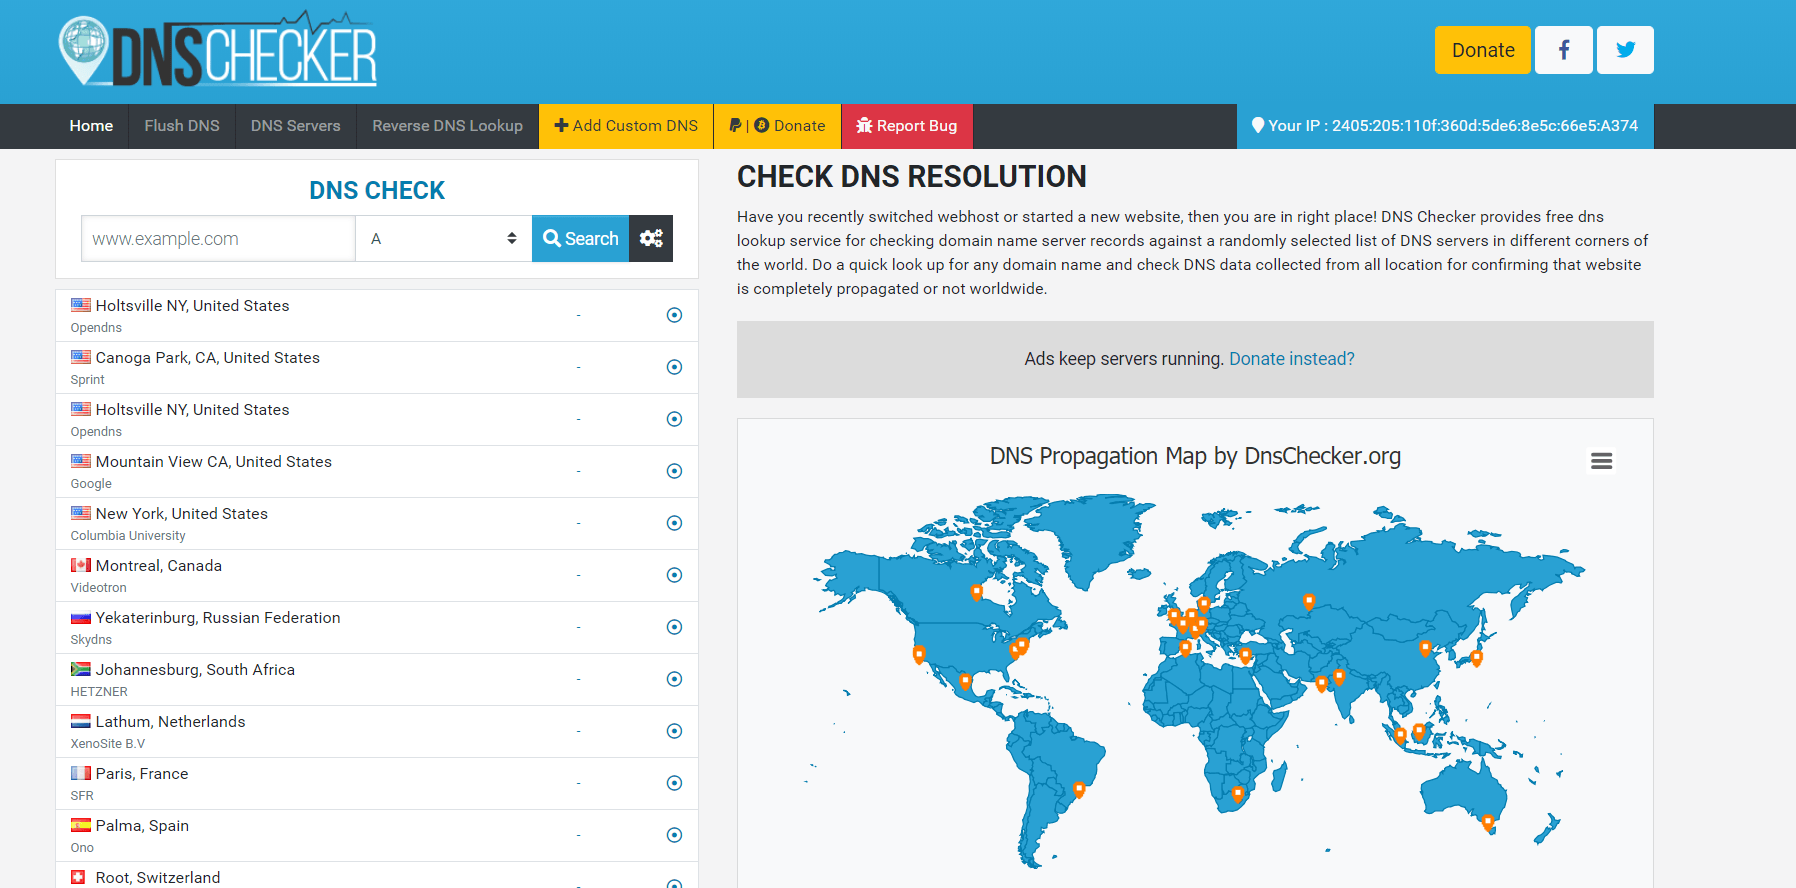 dnschecker.org - Best tools for checking website's DNS